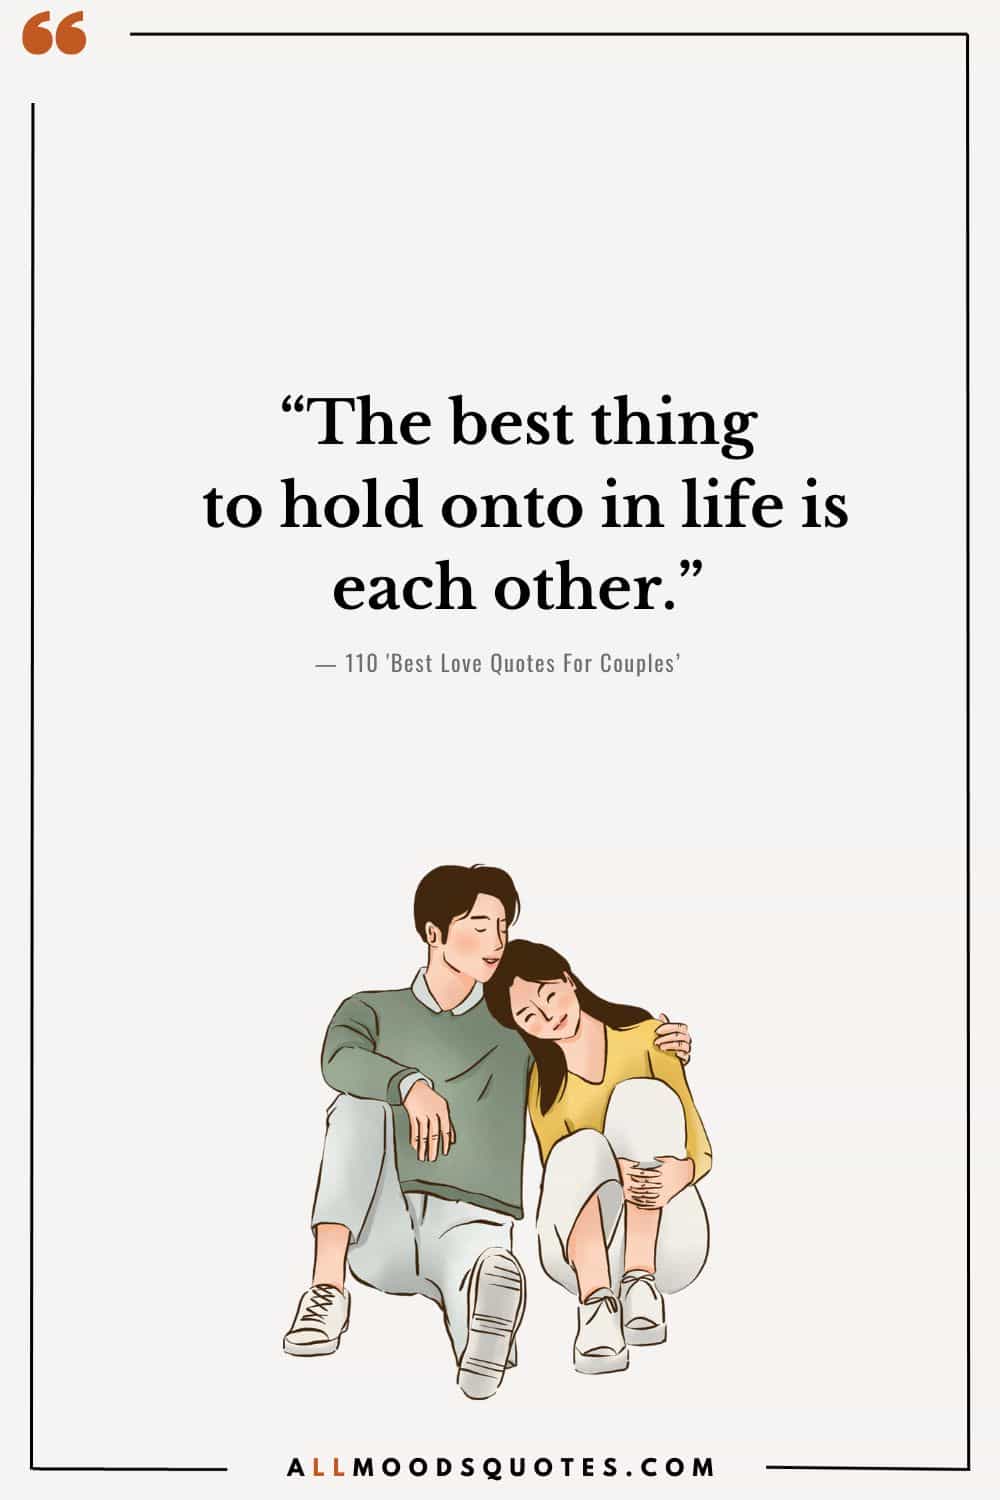 “The best thing to hold onto in life is each other.” – Audrey Hepburn